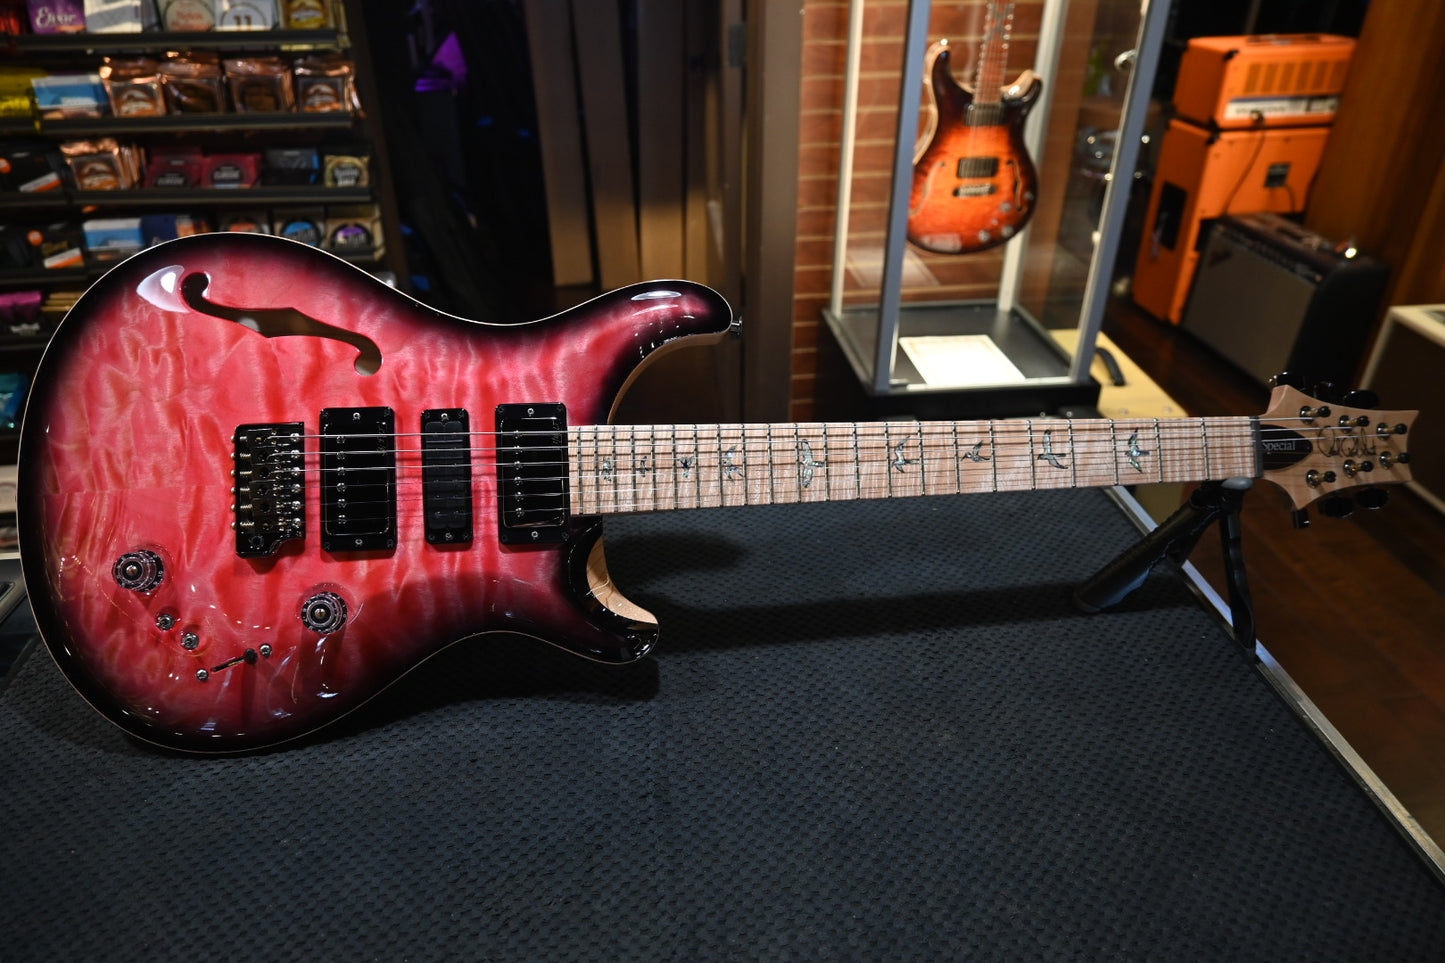 PRS Wood Library Special Semi-Hollow 10-Top Quilt - Bonni Pink Smokeburst Guitar #3307 - Danville Music